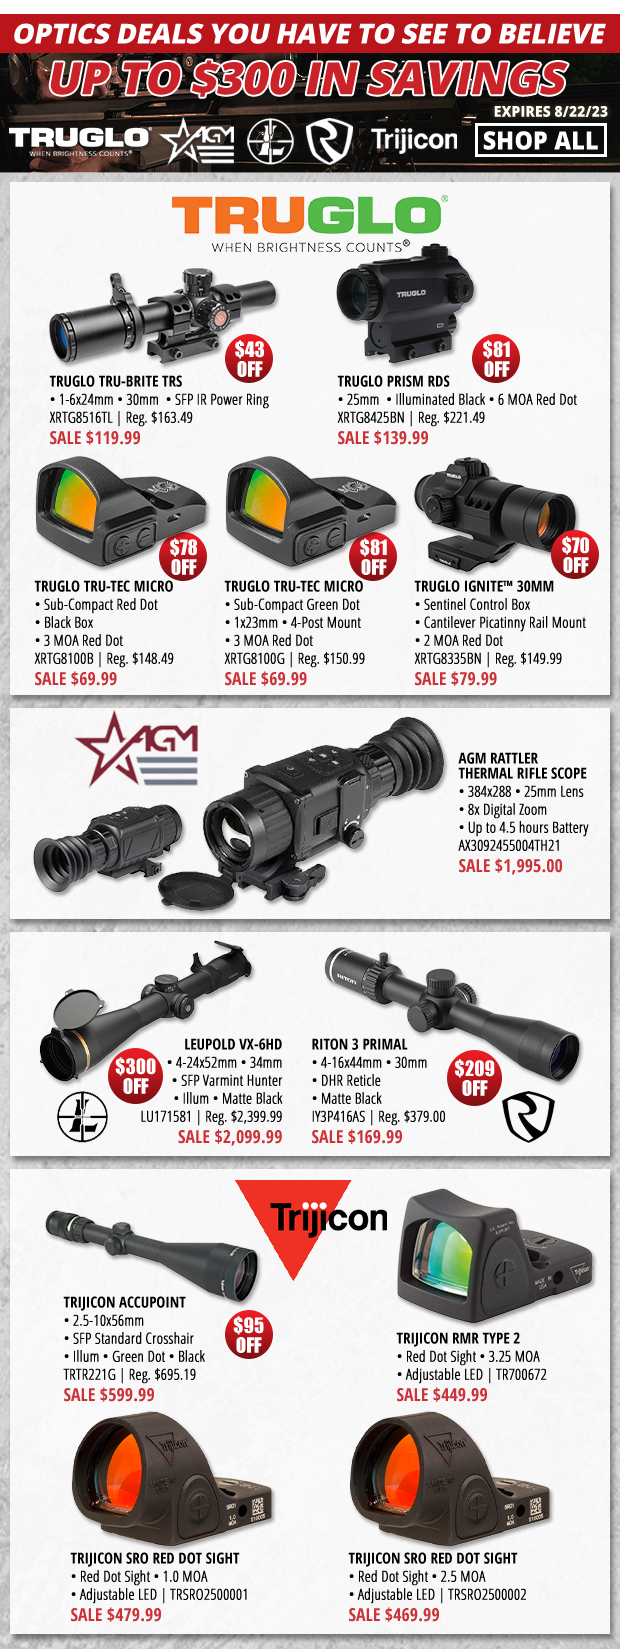 Up to $300 in Savings on Top Optics